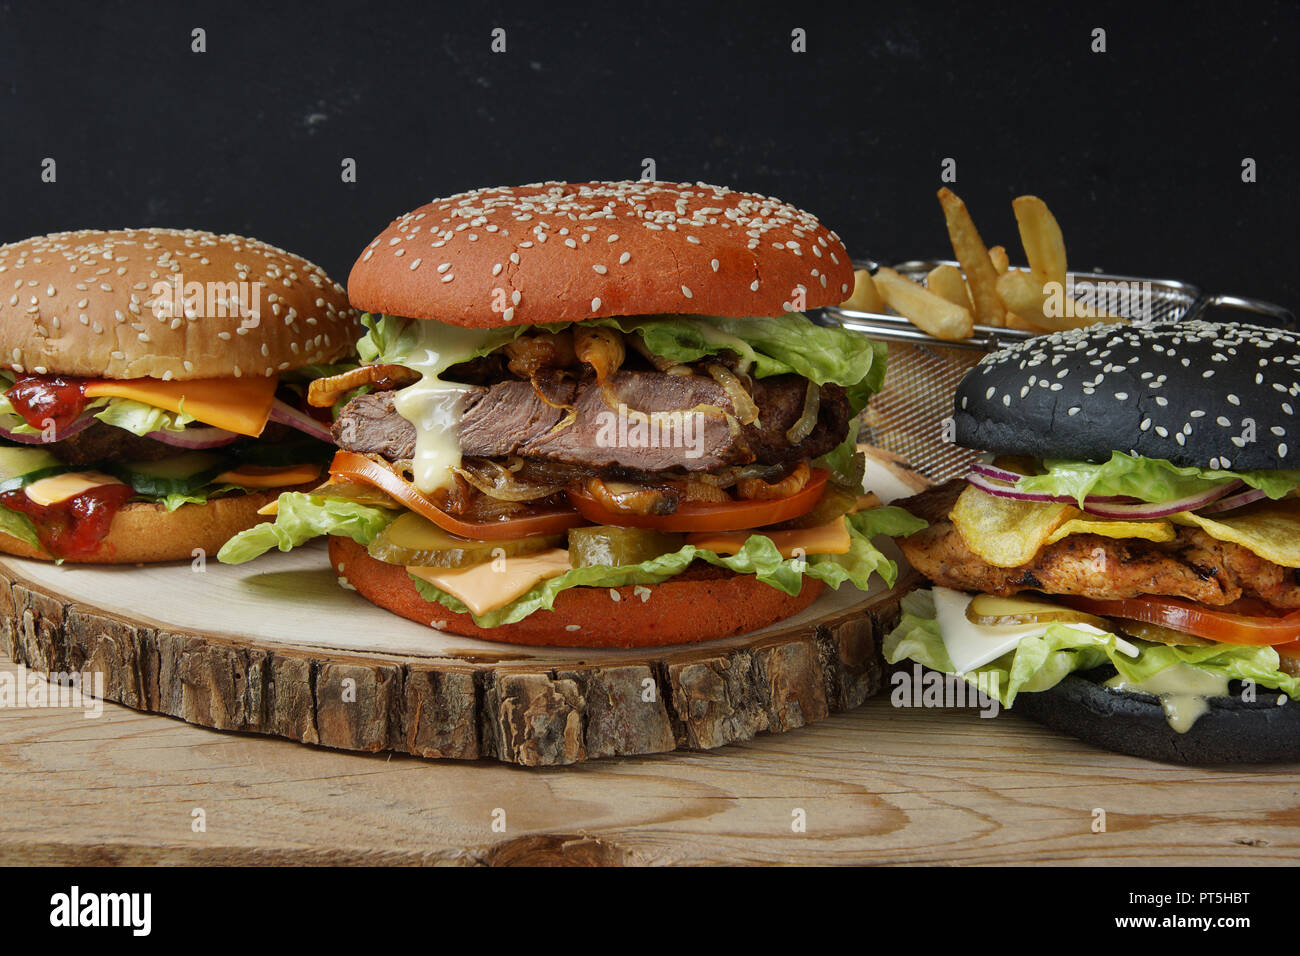 Three large beautiful burger with buns of different colors and different fillings, chicken, meat patty and steak. Stock Photo